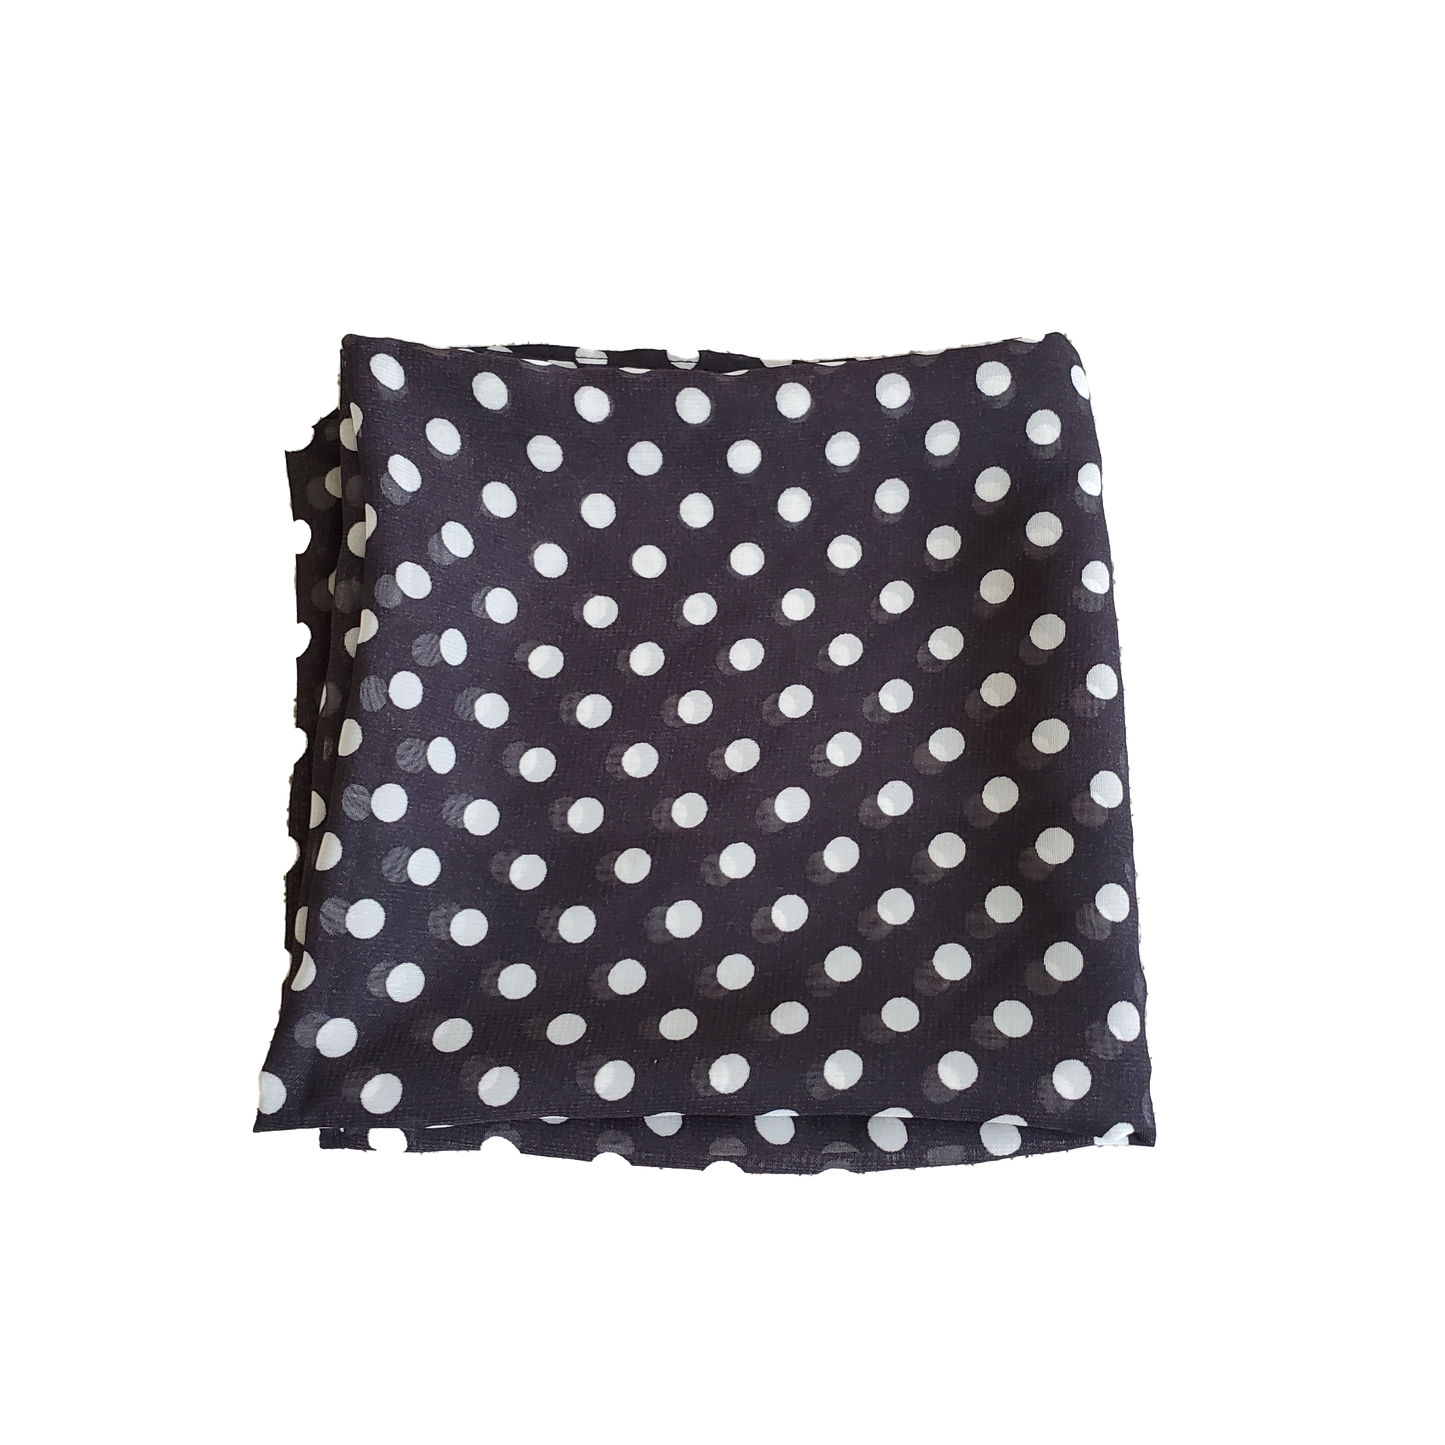 Scarf in Black with White Polka Dots